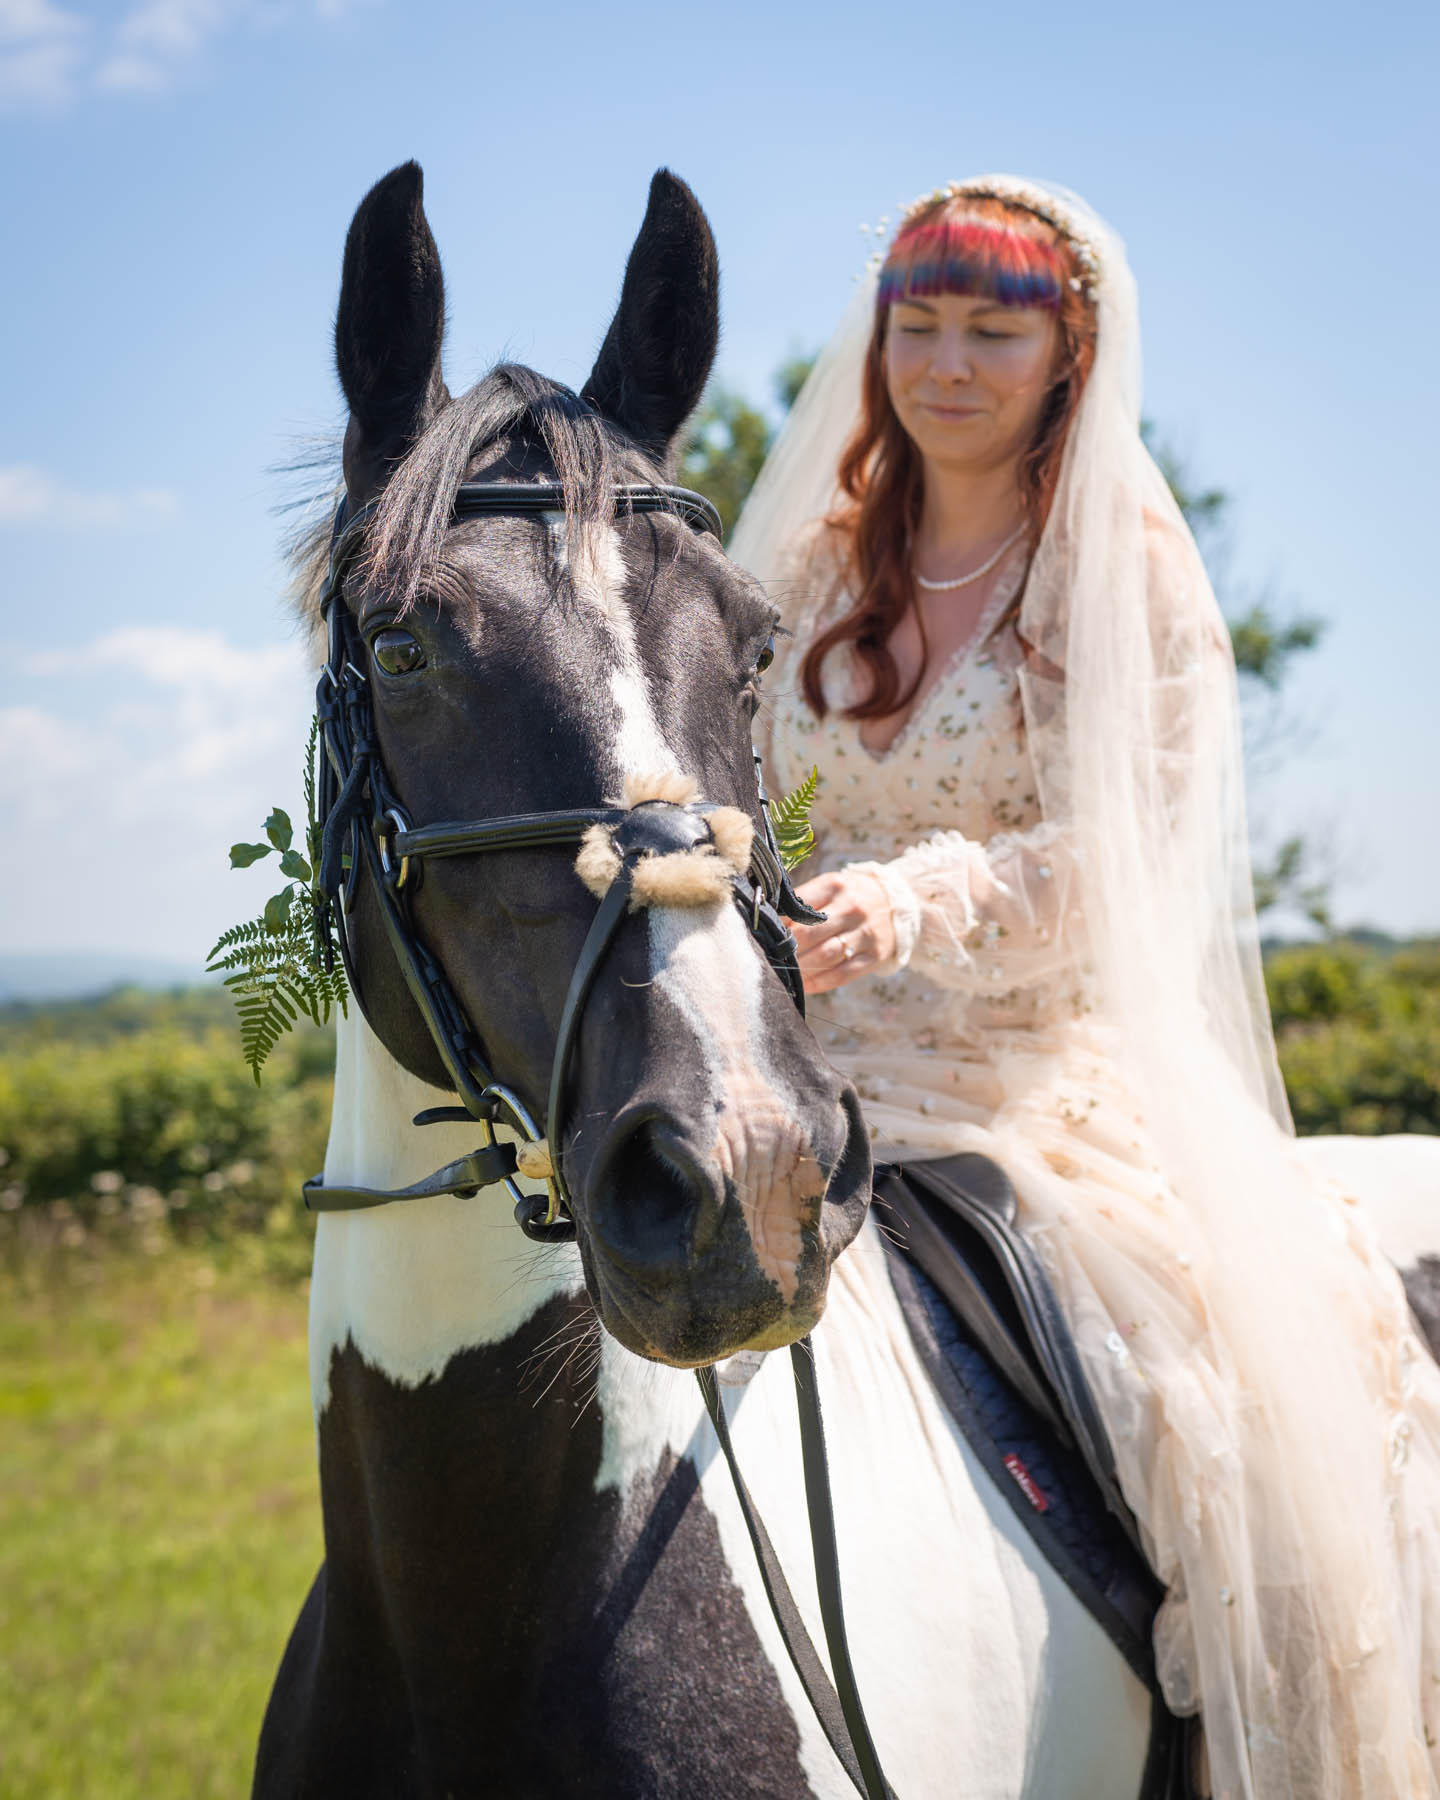 the bride on the horse straight before the handfasting ceremony